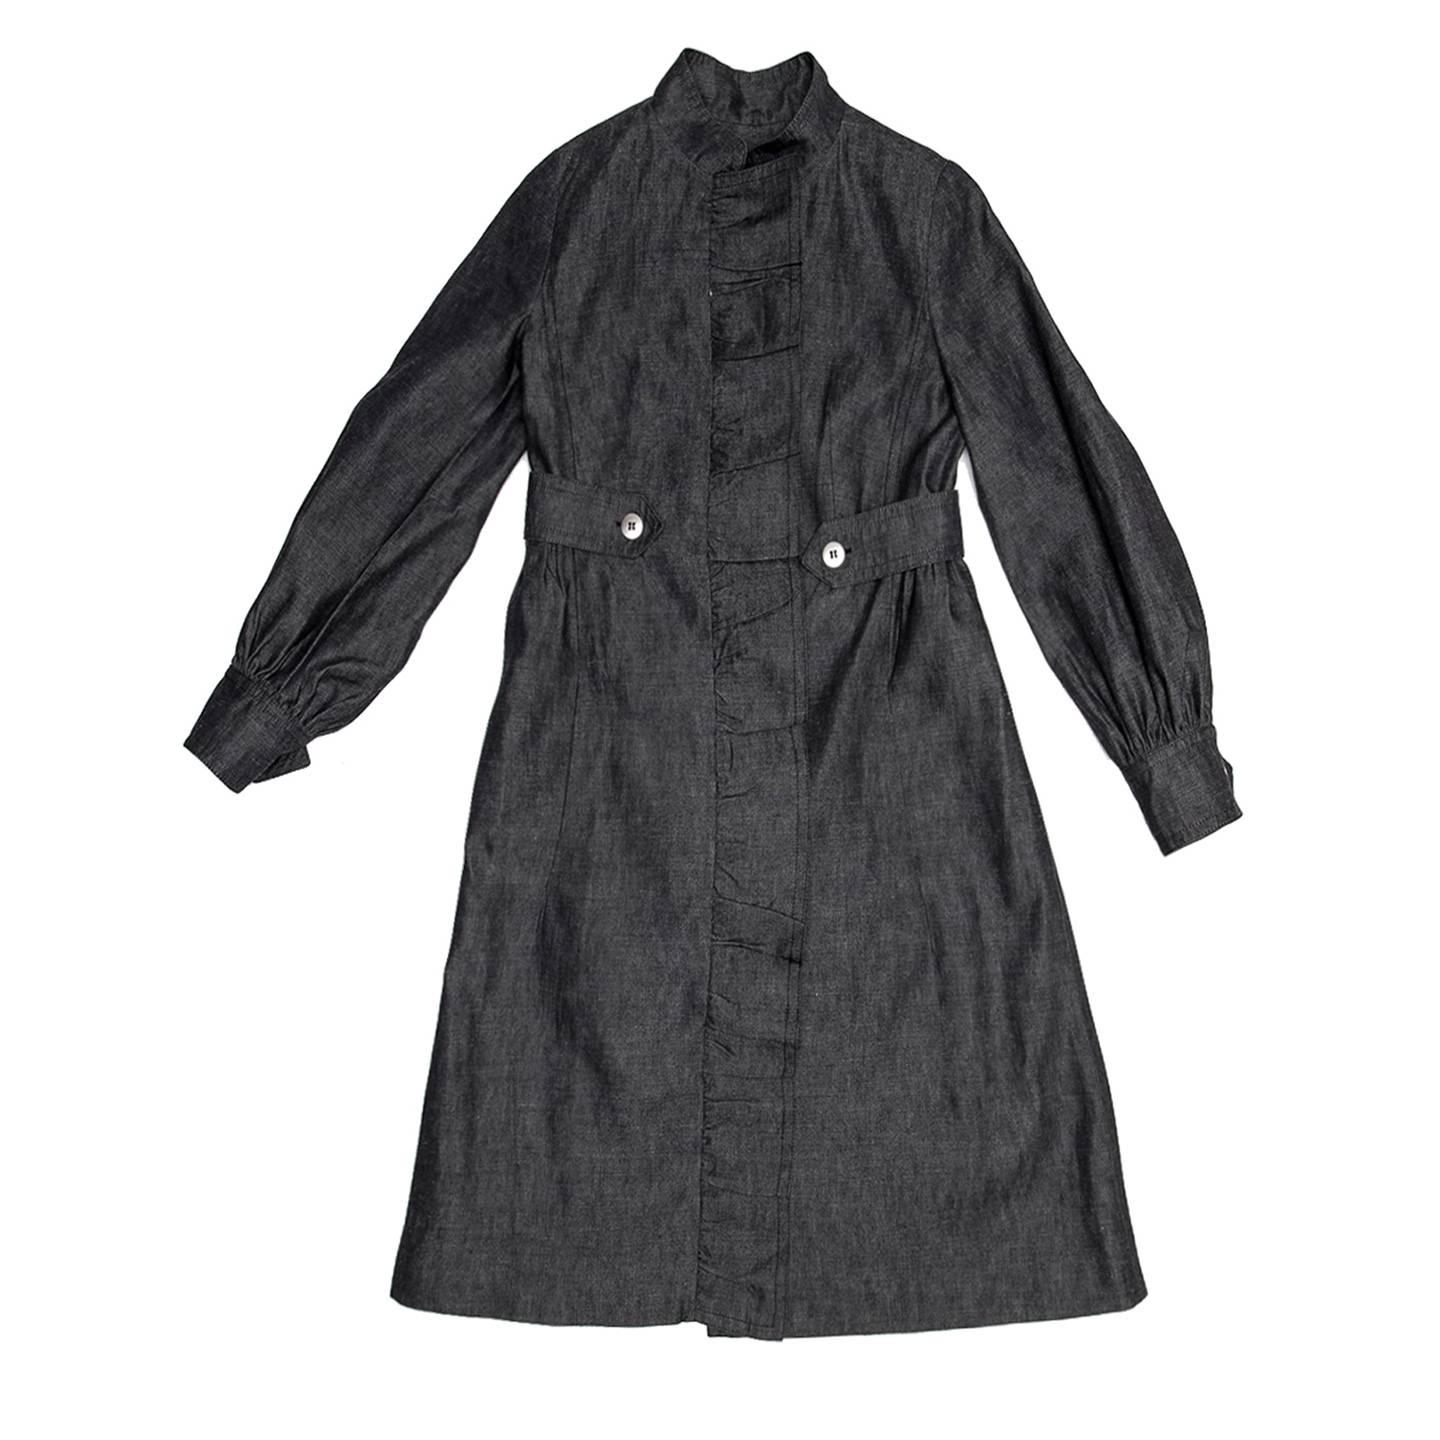 Cotton & ramie blend denim coat with an A-line skirt part gathered at side and back waistline. The length is below the knees, the collar is Nehru style and the waist is belted at sides only and fastened with silver metal buttons. The sleeves are